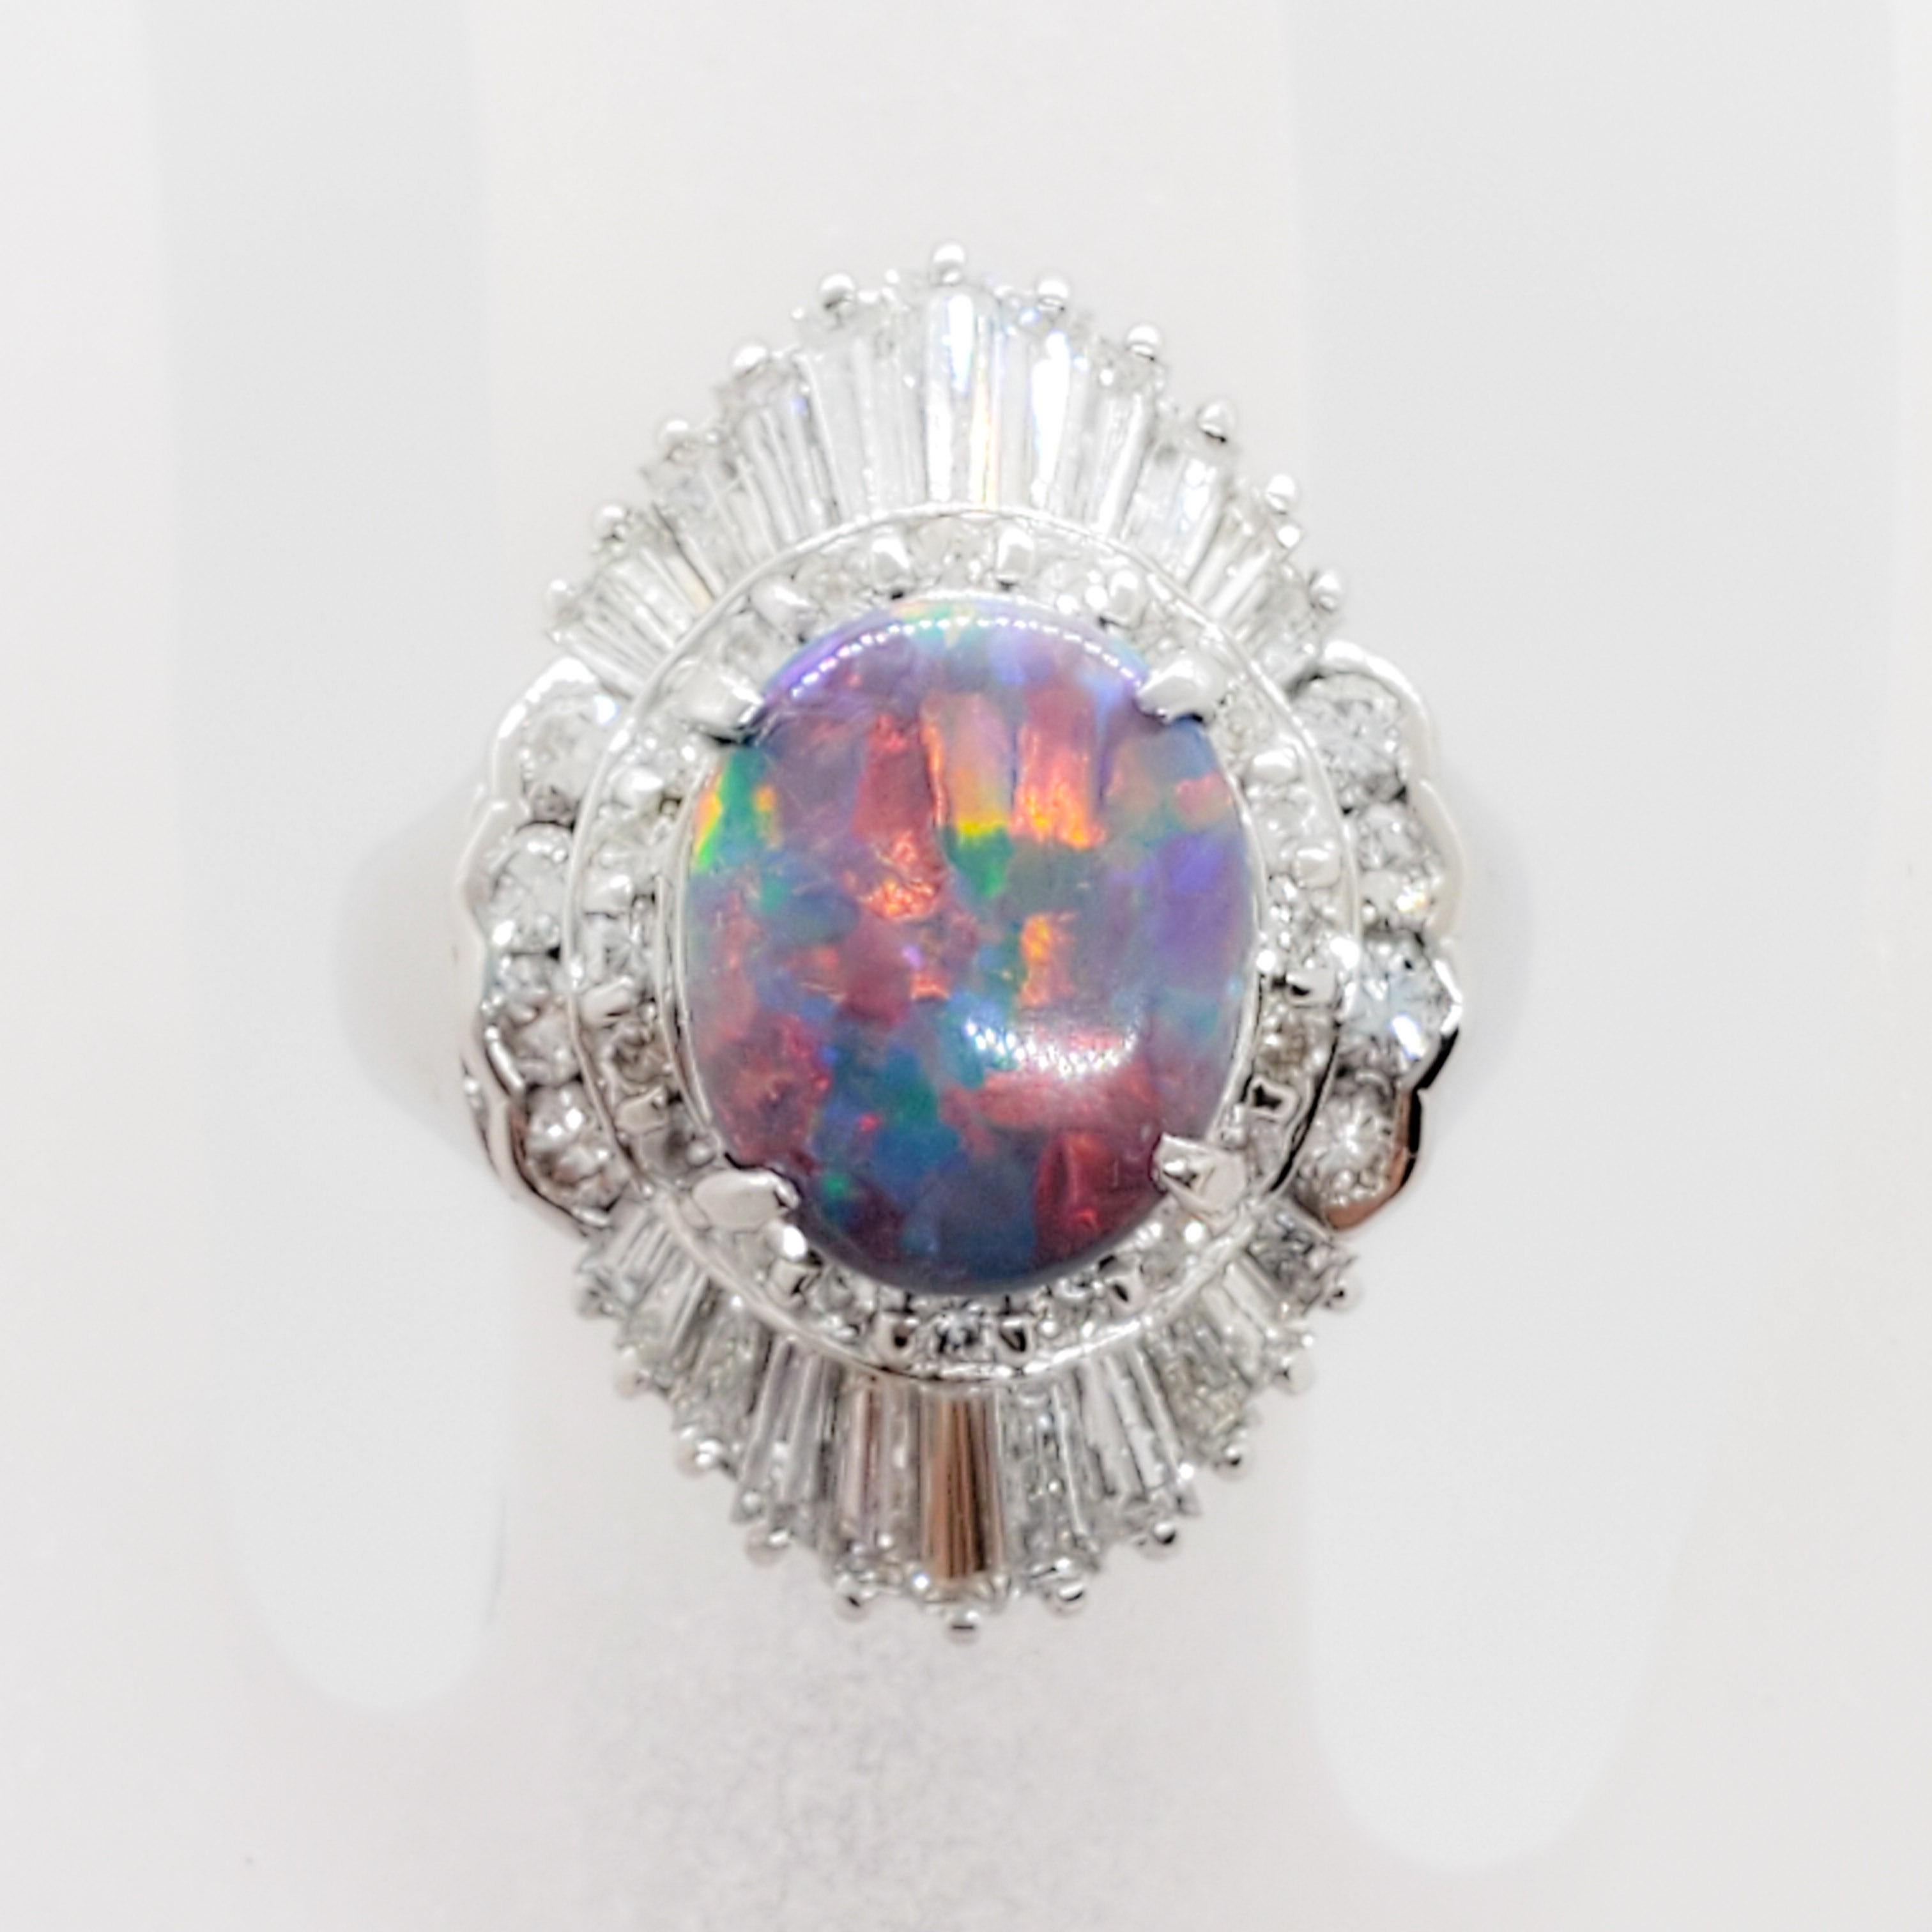 Gorgeous estate black opal ring with 1.47 cts of good quality white diamonds and a 1.97 ct. black opal oval.  This ring is handmade in platinum in a size 6.  Really pretty colors running through this opal.  Perfect for day or night.